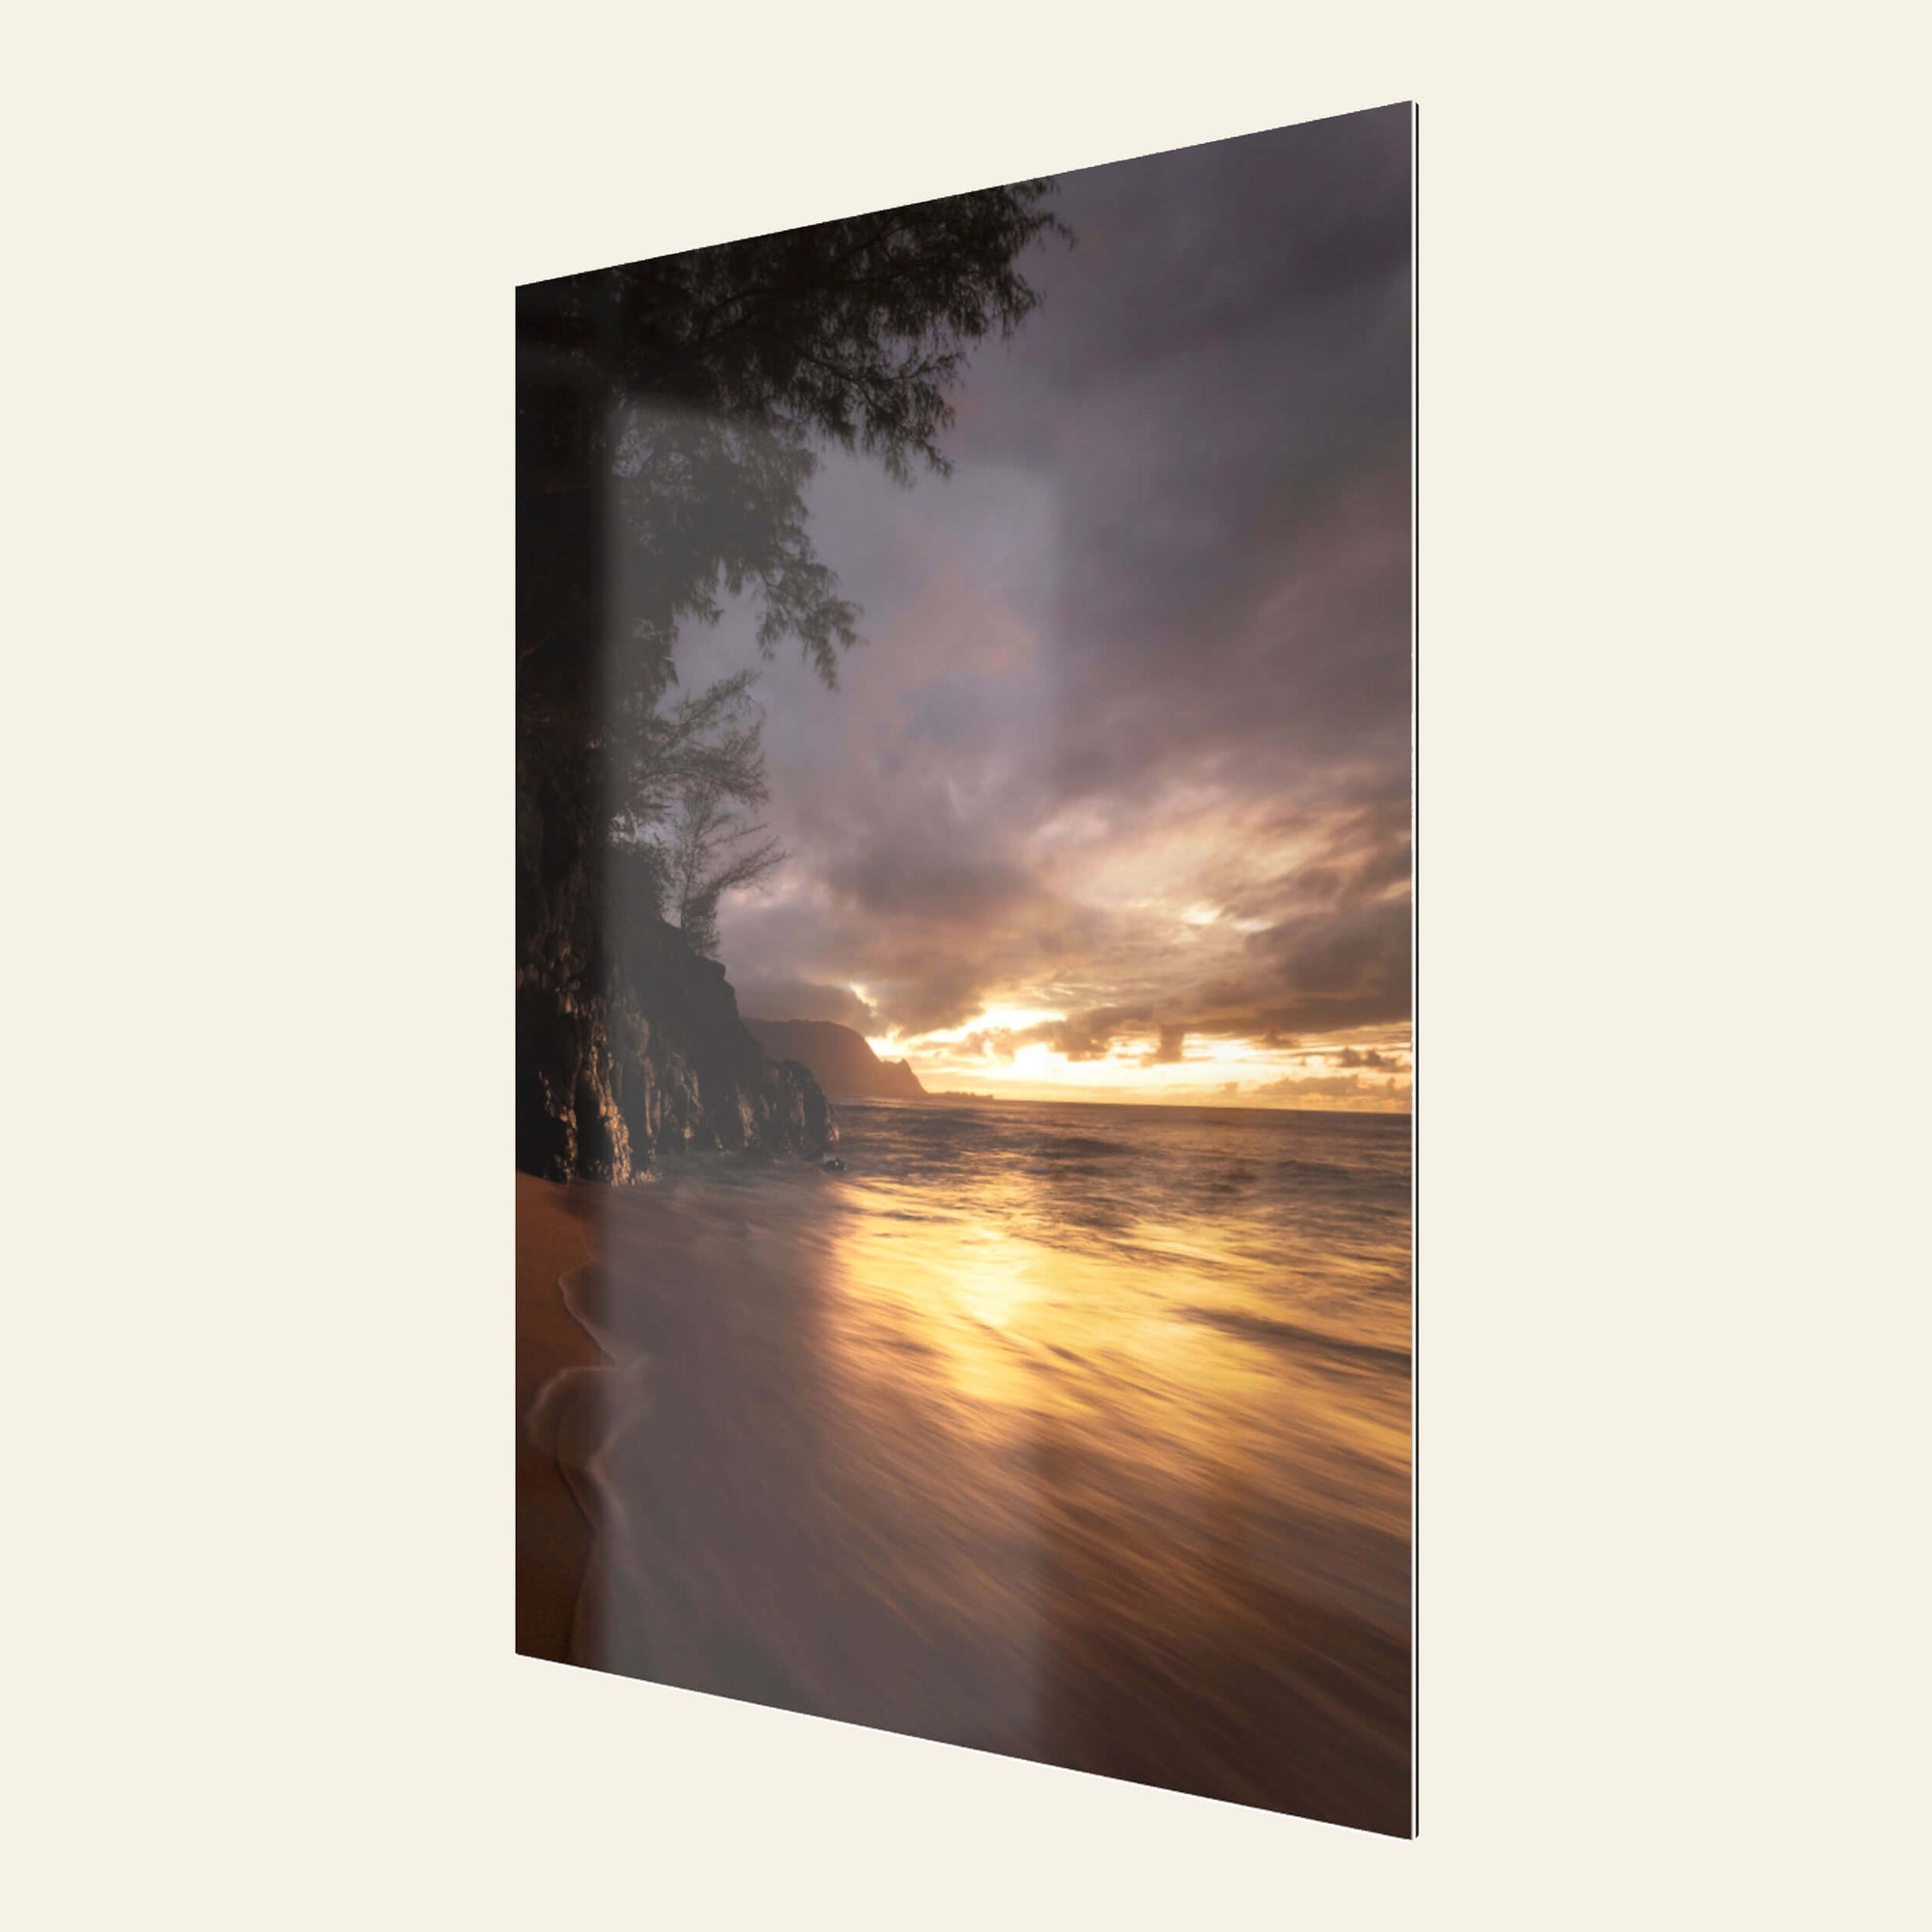 A TruLife acrylic sunset picture from Hideaway Beach in Princeville, Kauai.